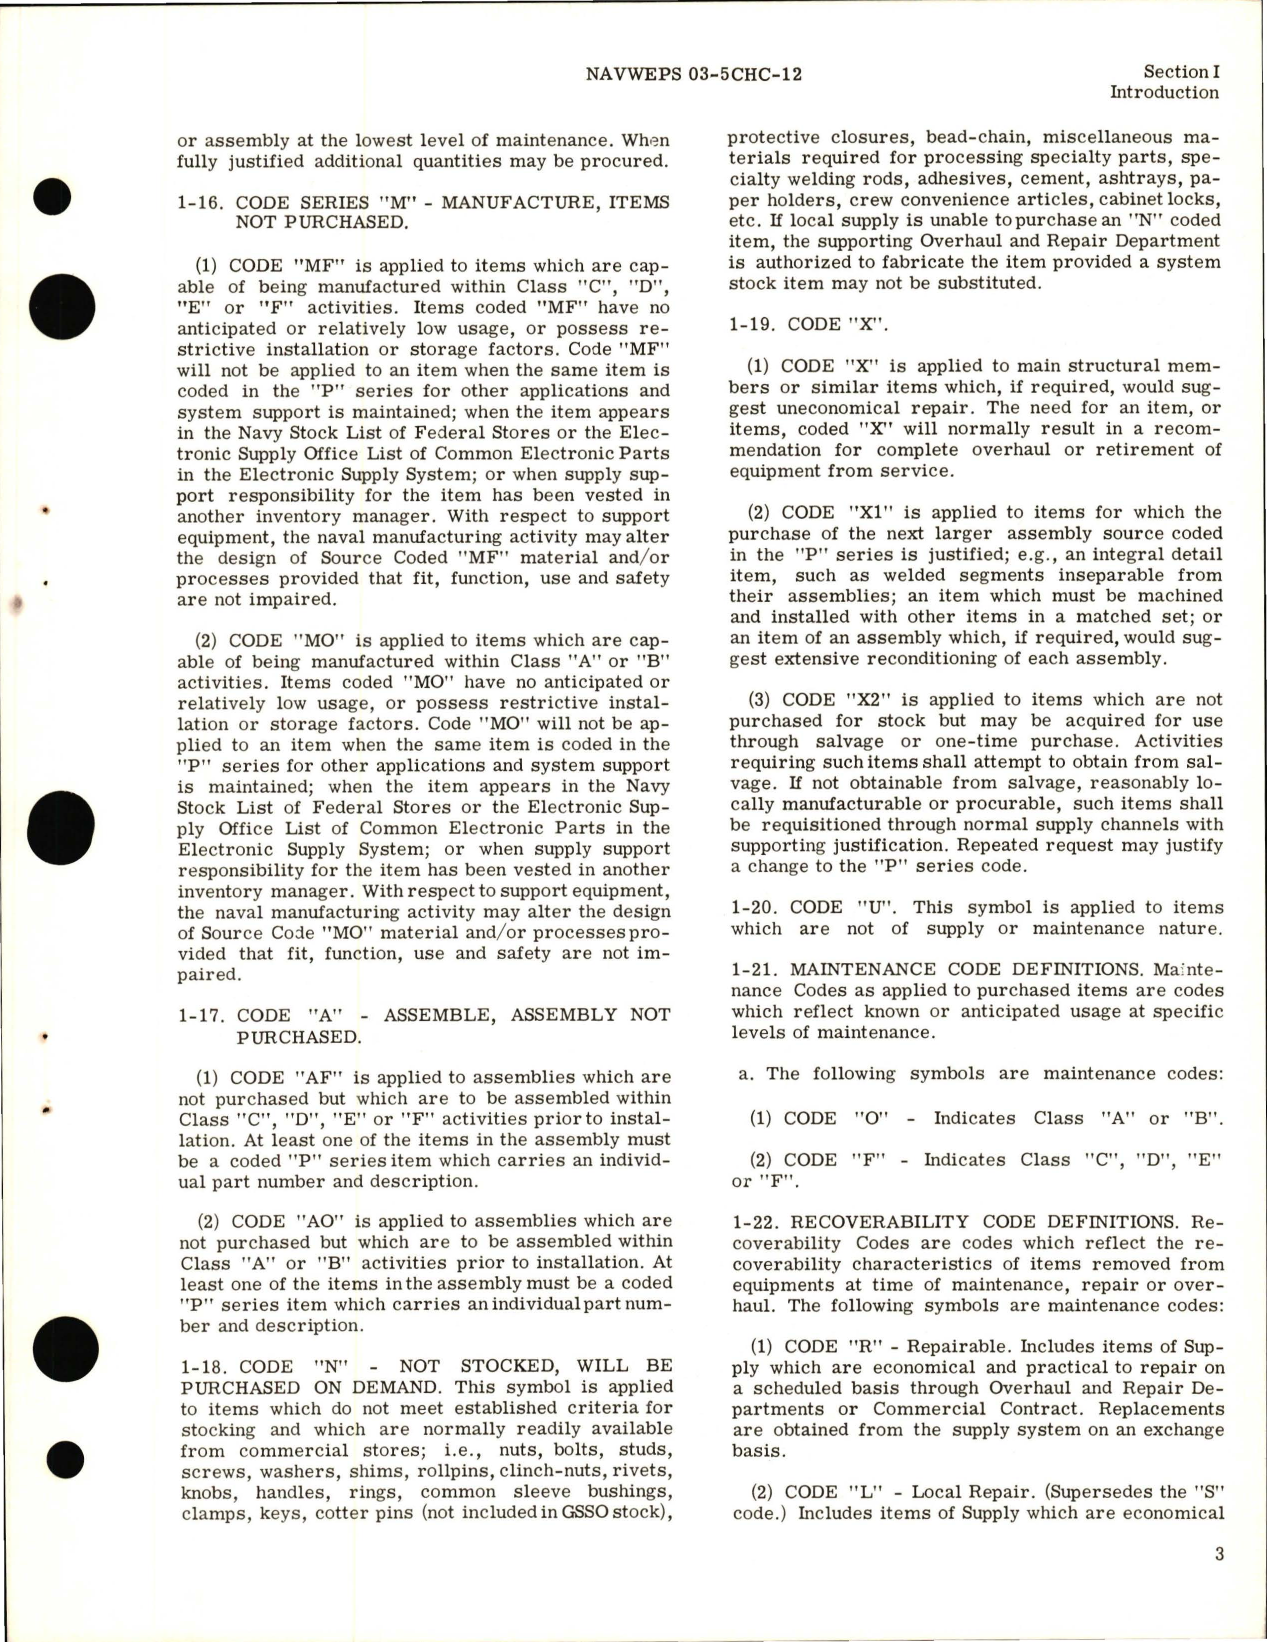 Sample page 5 from AirCorps Library document: Illustrated Parts Breakdown for Temperature Control Box - Part CYLZ 4807-3 